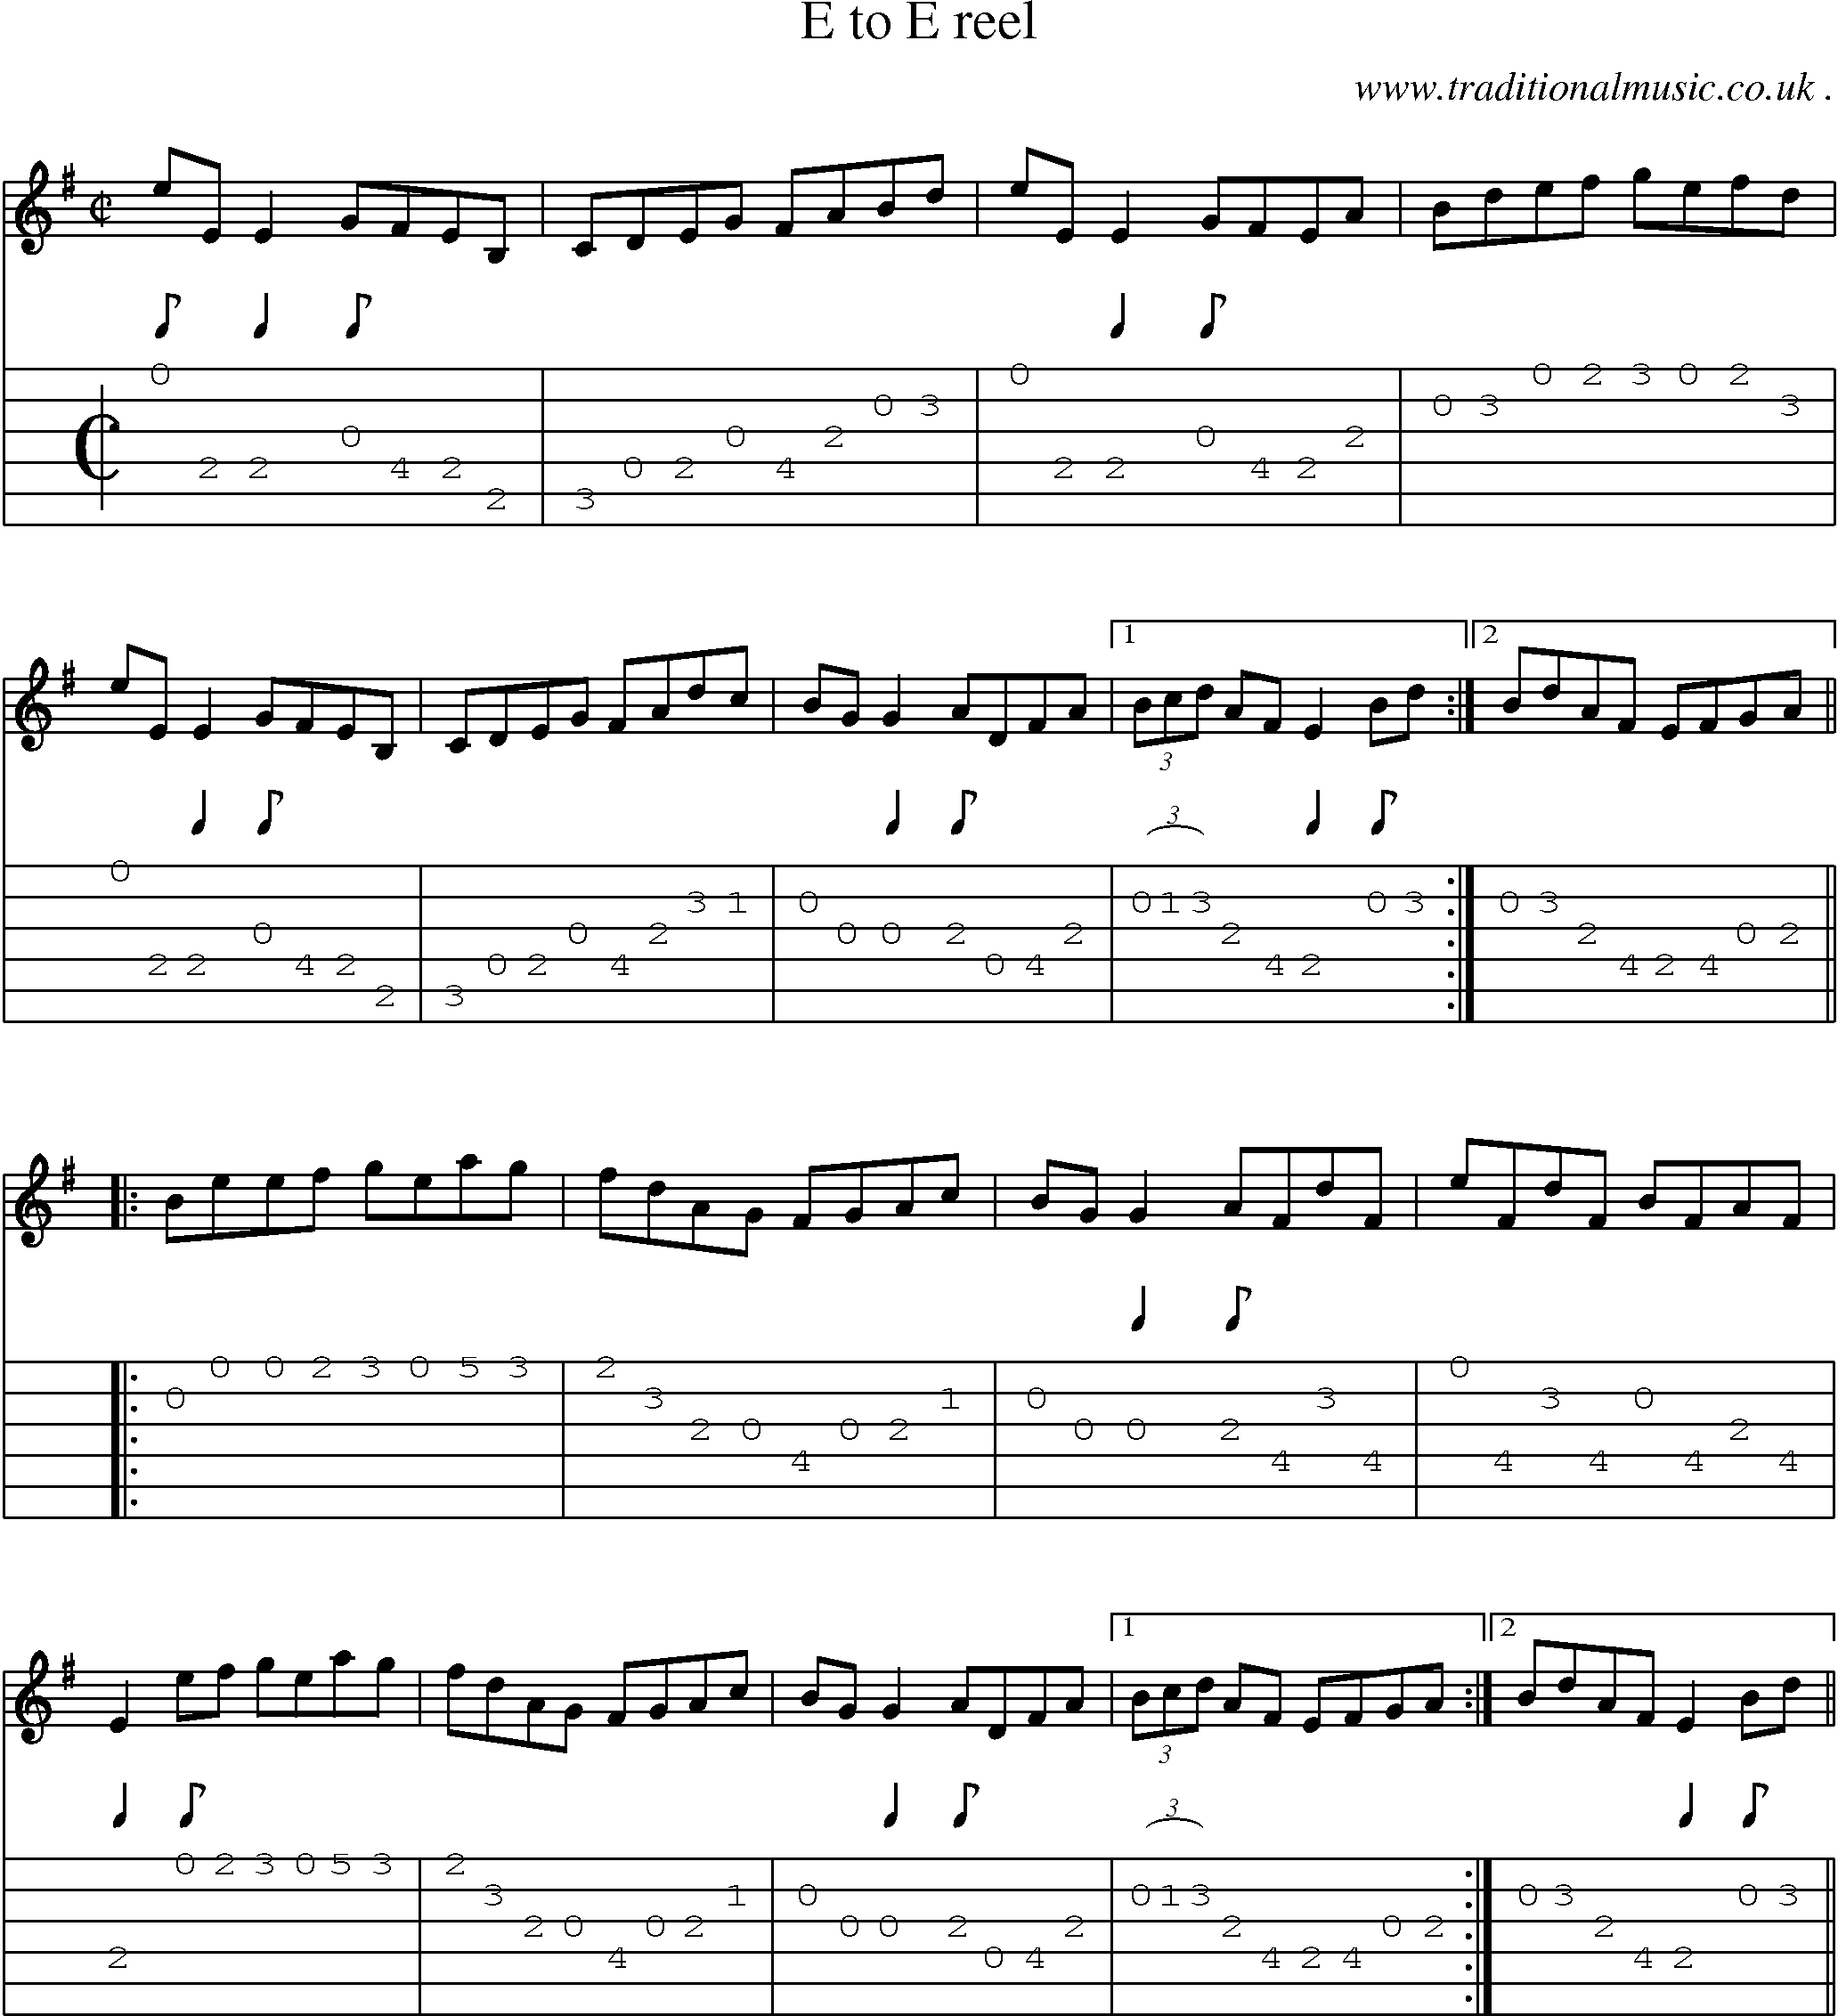 Sheet-Music and Guitar Tabs for E To E Reel